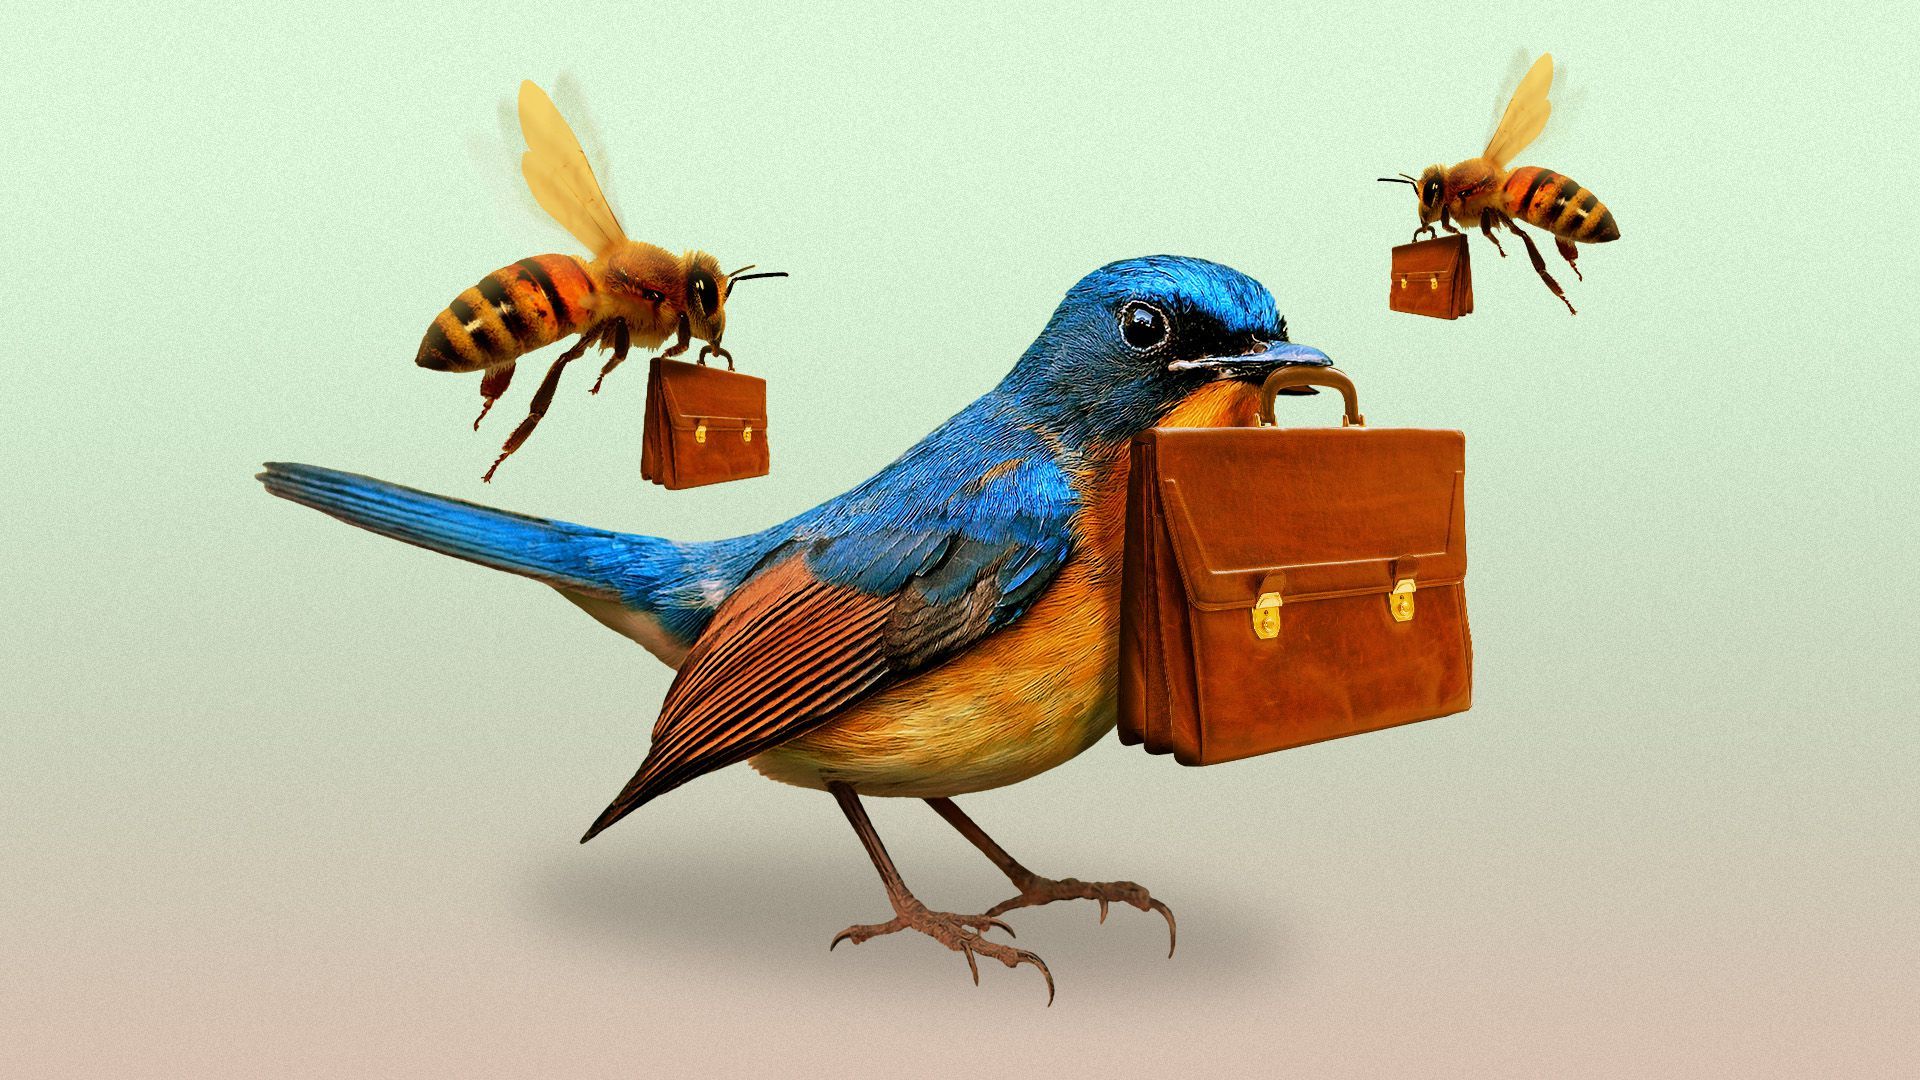 Illustration of a bird and two bees all holding briefcases